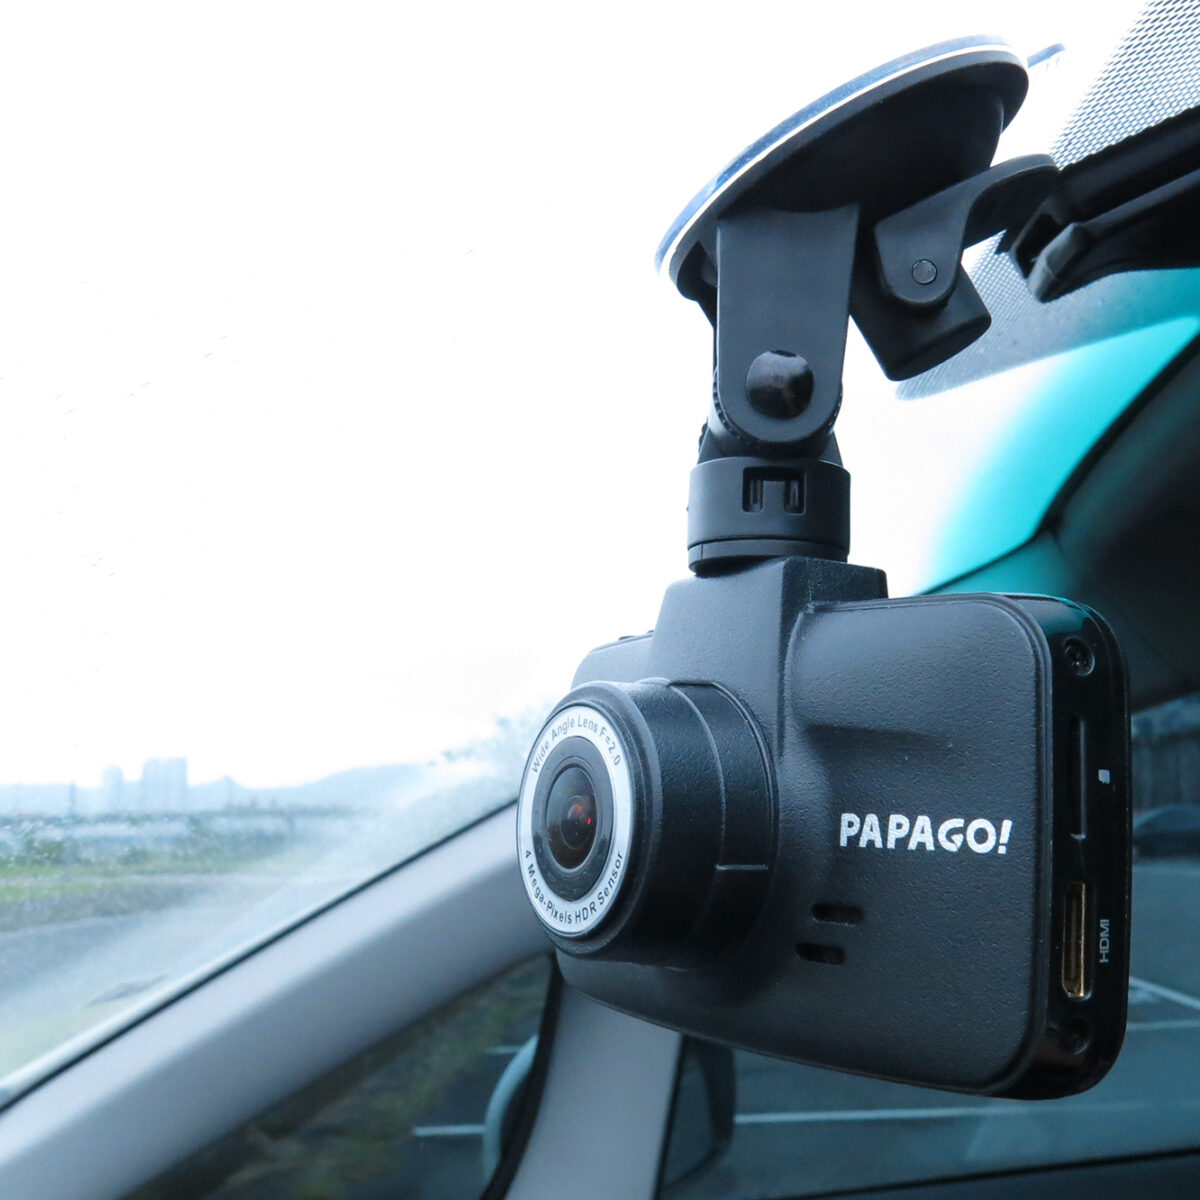 Keeping An Eye On The Road – PAPAGO! GoSafe 520 Dashcam Review – Techgage